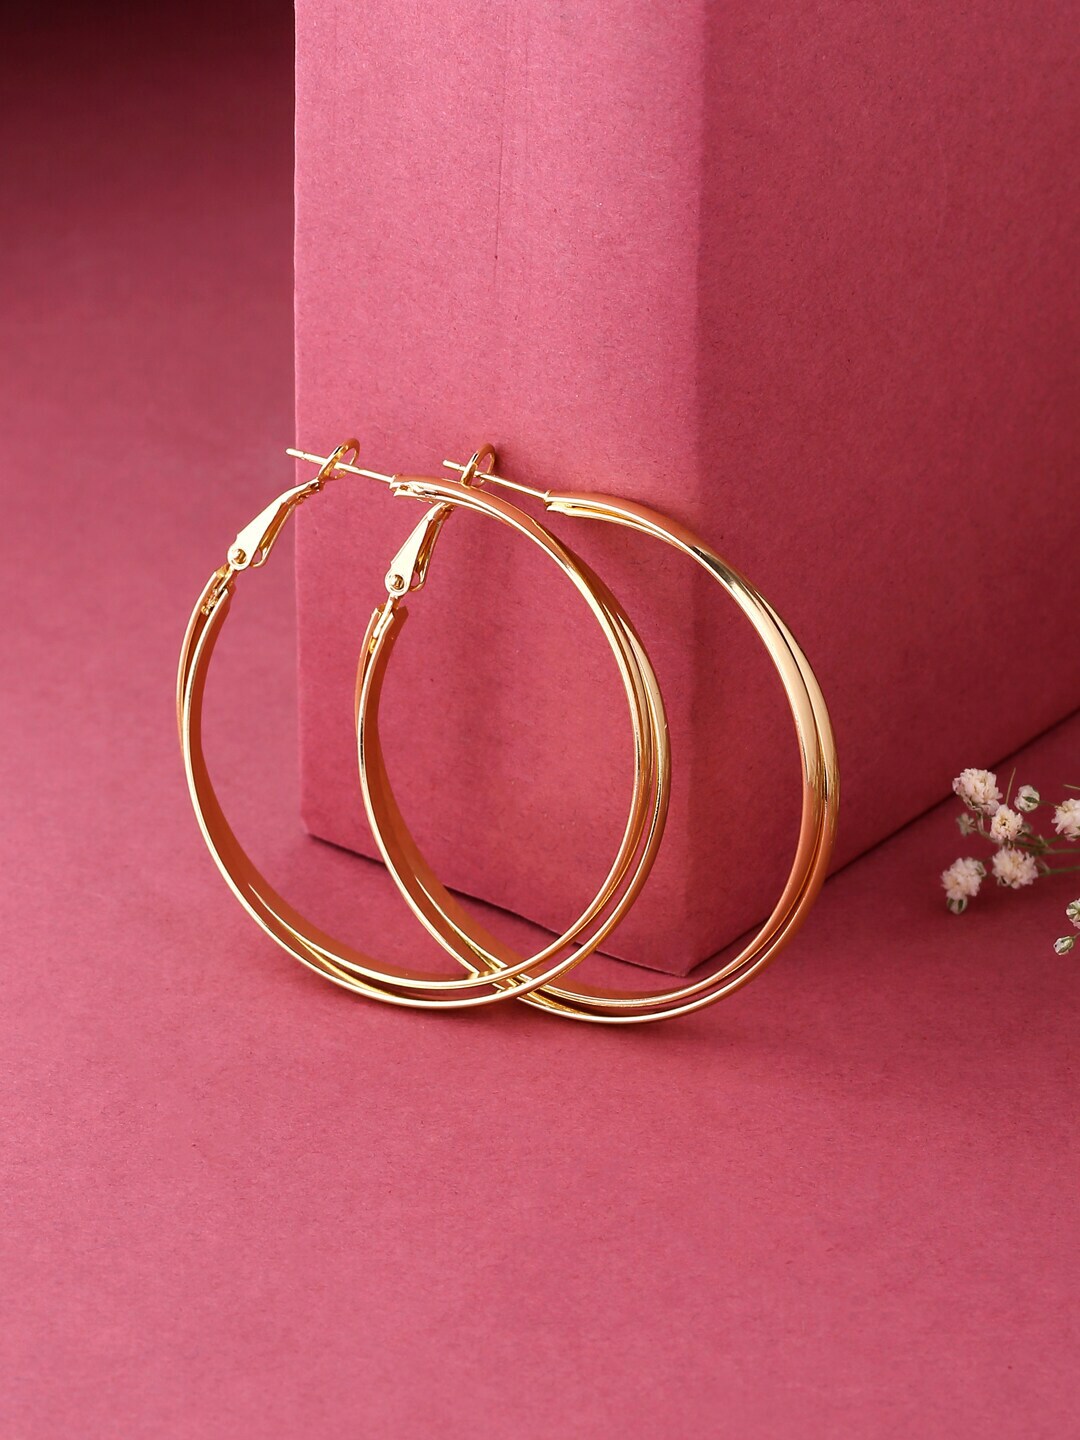 kashwini Gold-Toned Contemporary Hoop Earrings Price in India